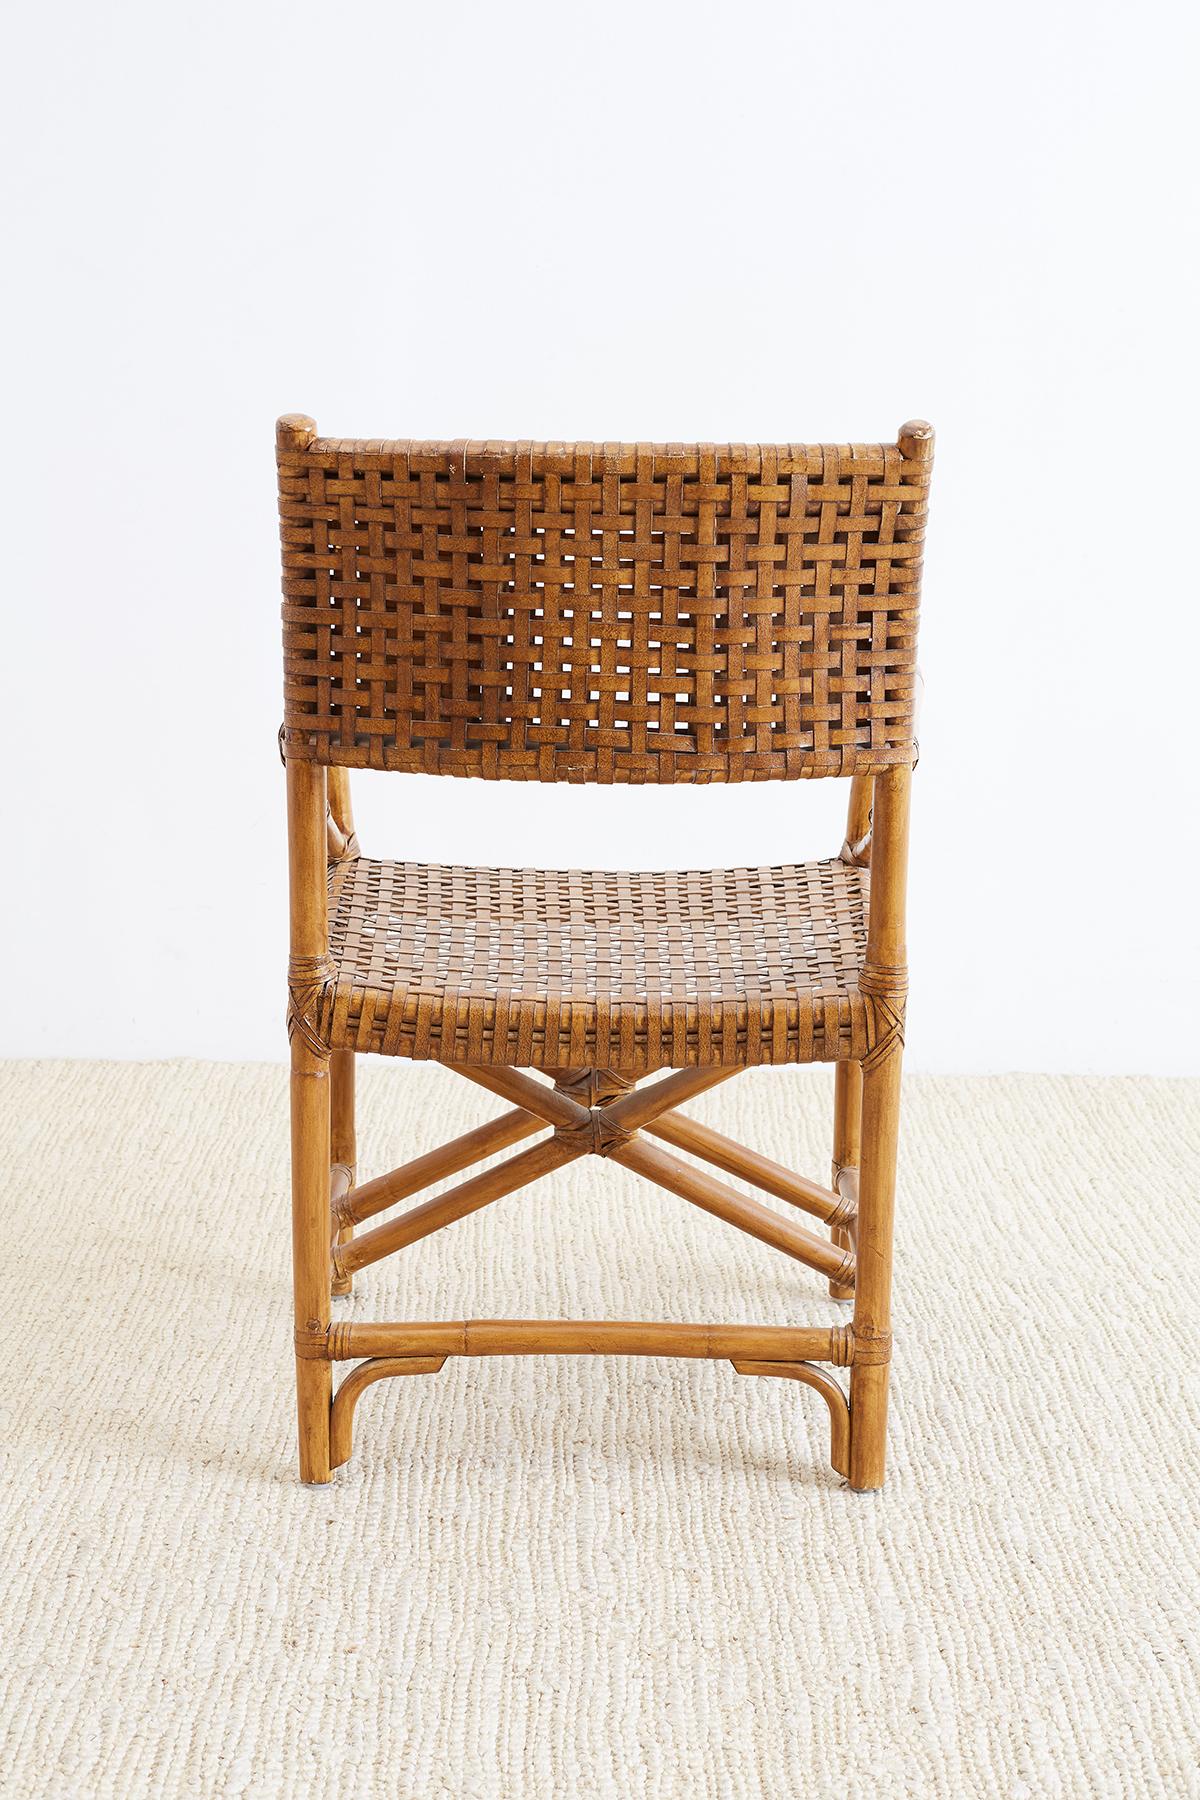 American McGuire Style Woven Leather Rattan Dining Chairs